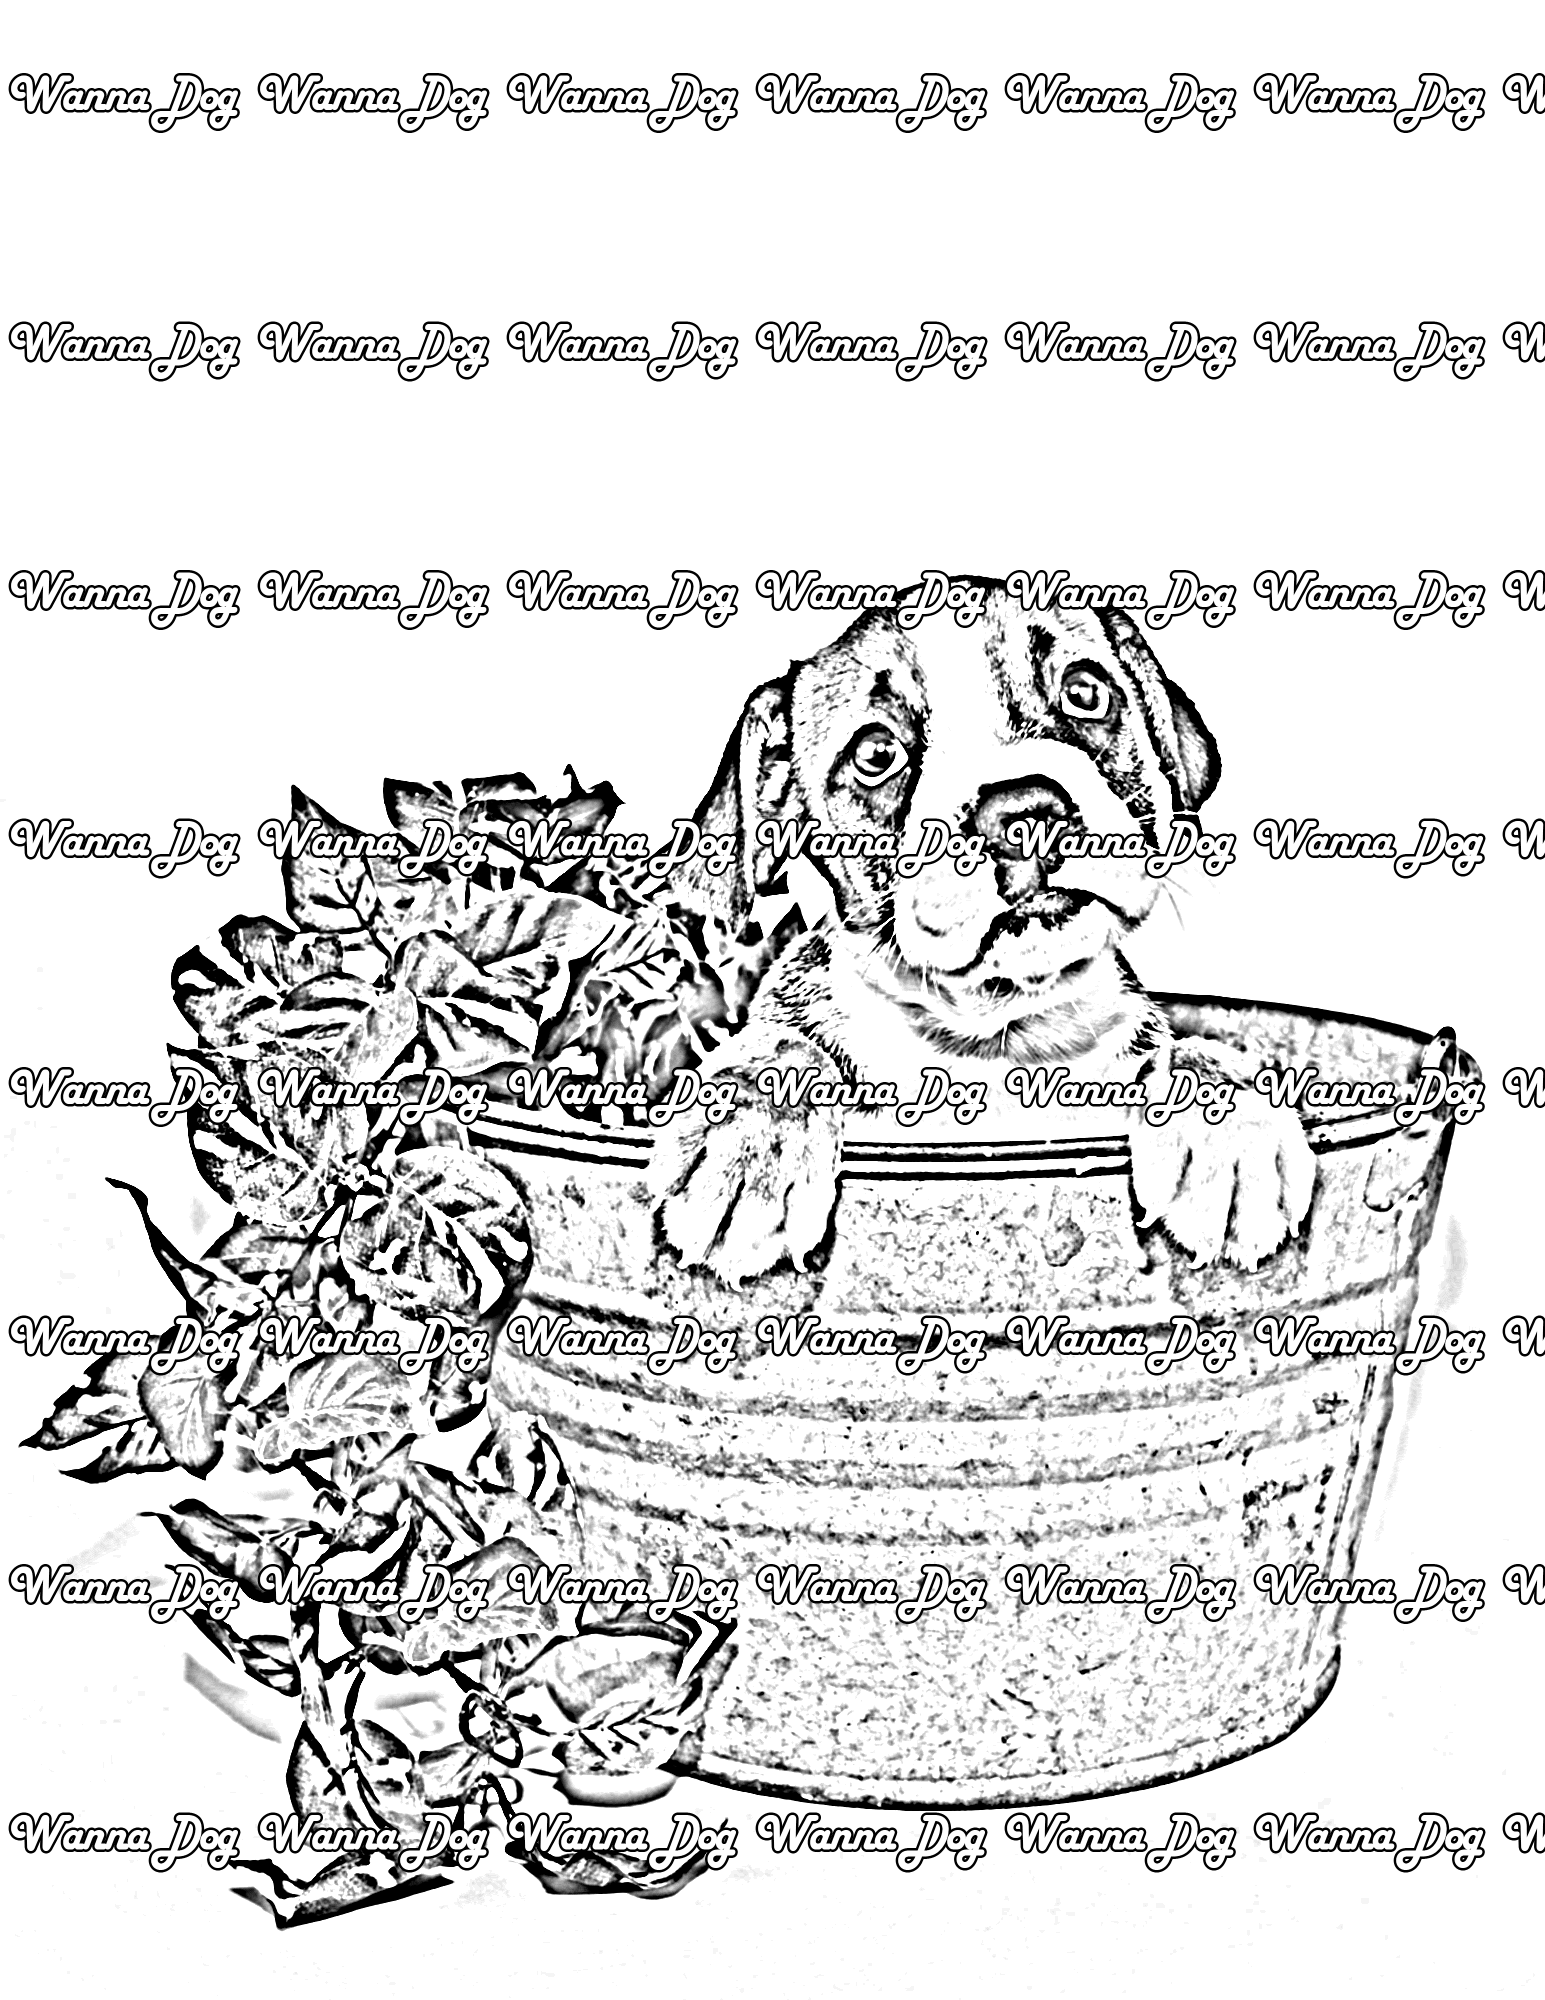 Bulldog Puppy Coloring Page of a Bulldog Puppy sitting in a bucket with leaves